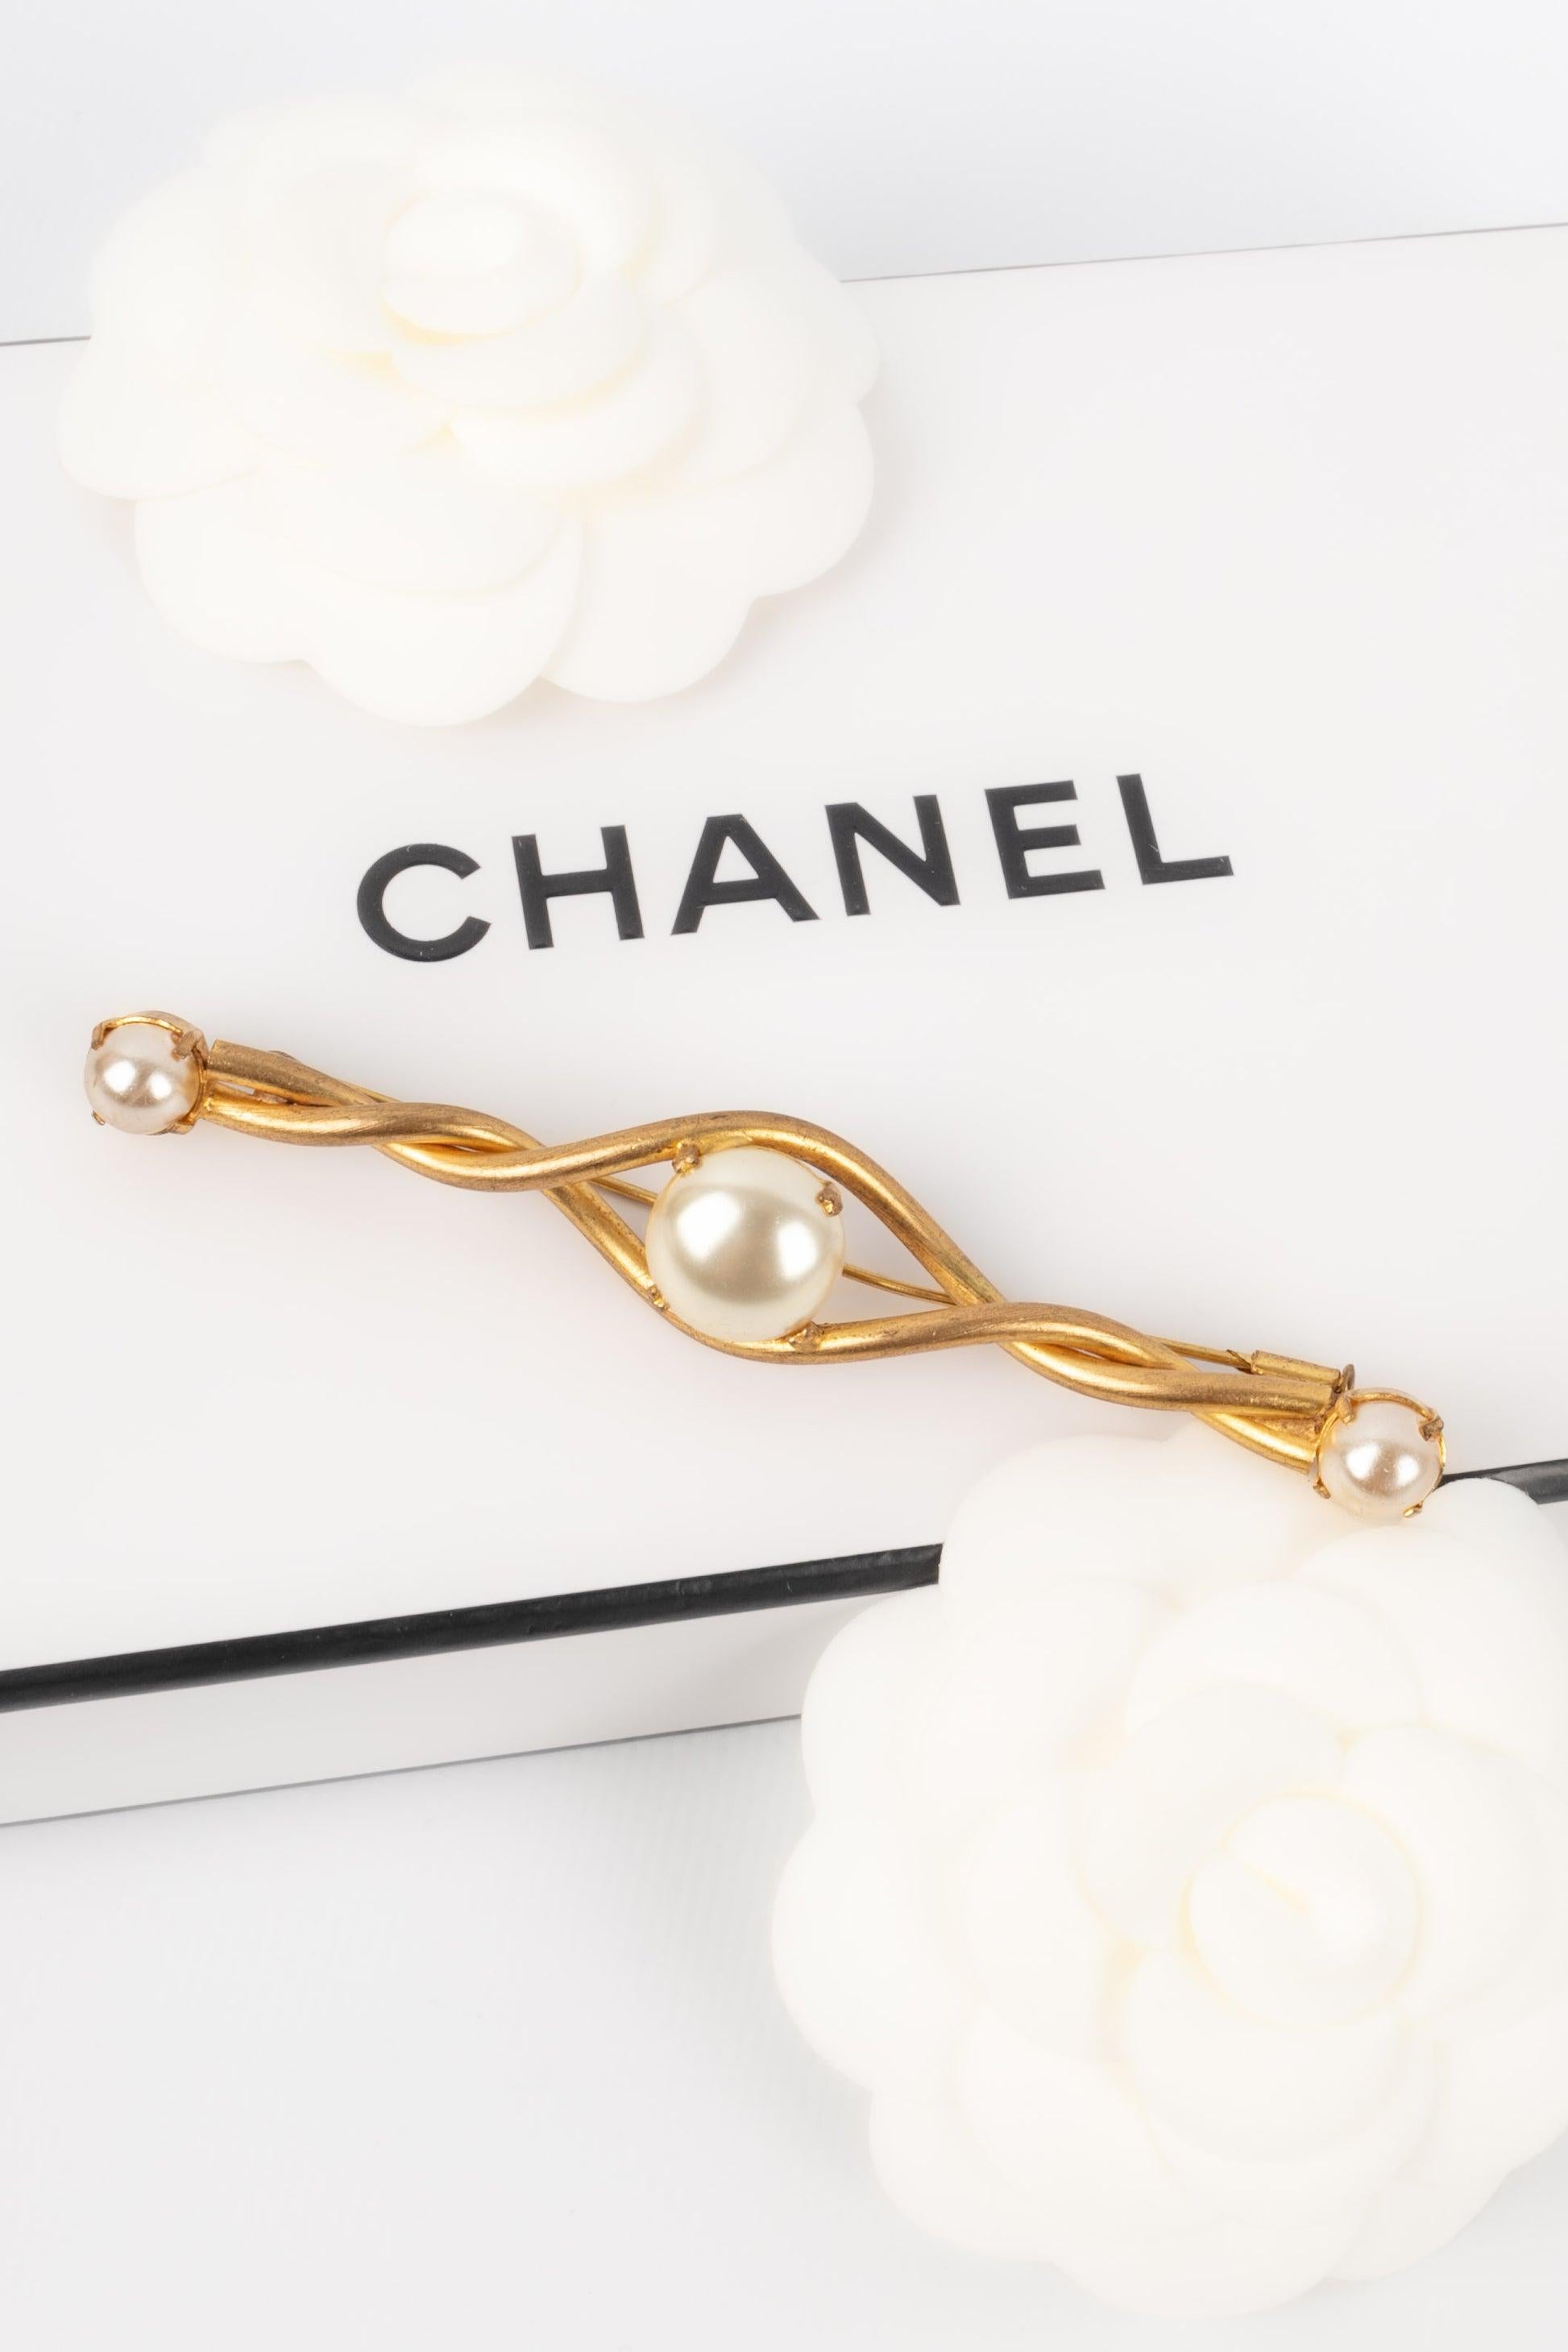 Chanel Long Brooch in Gold-Plated Metal with Three Pearly Cabochons For Sale 3